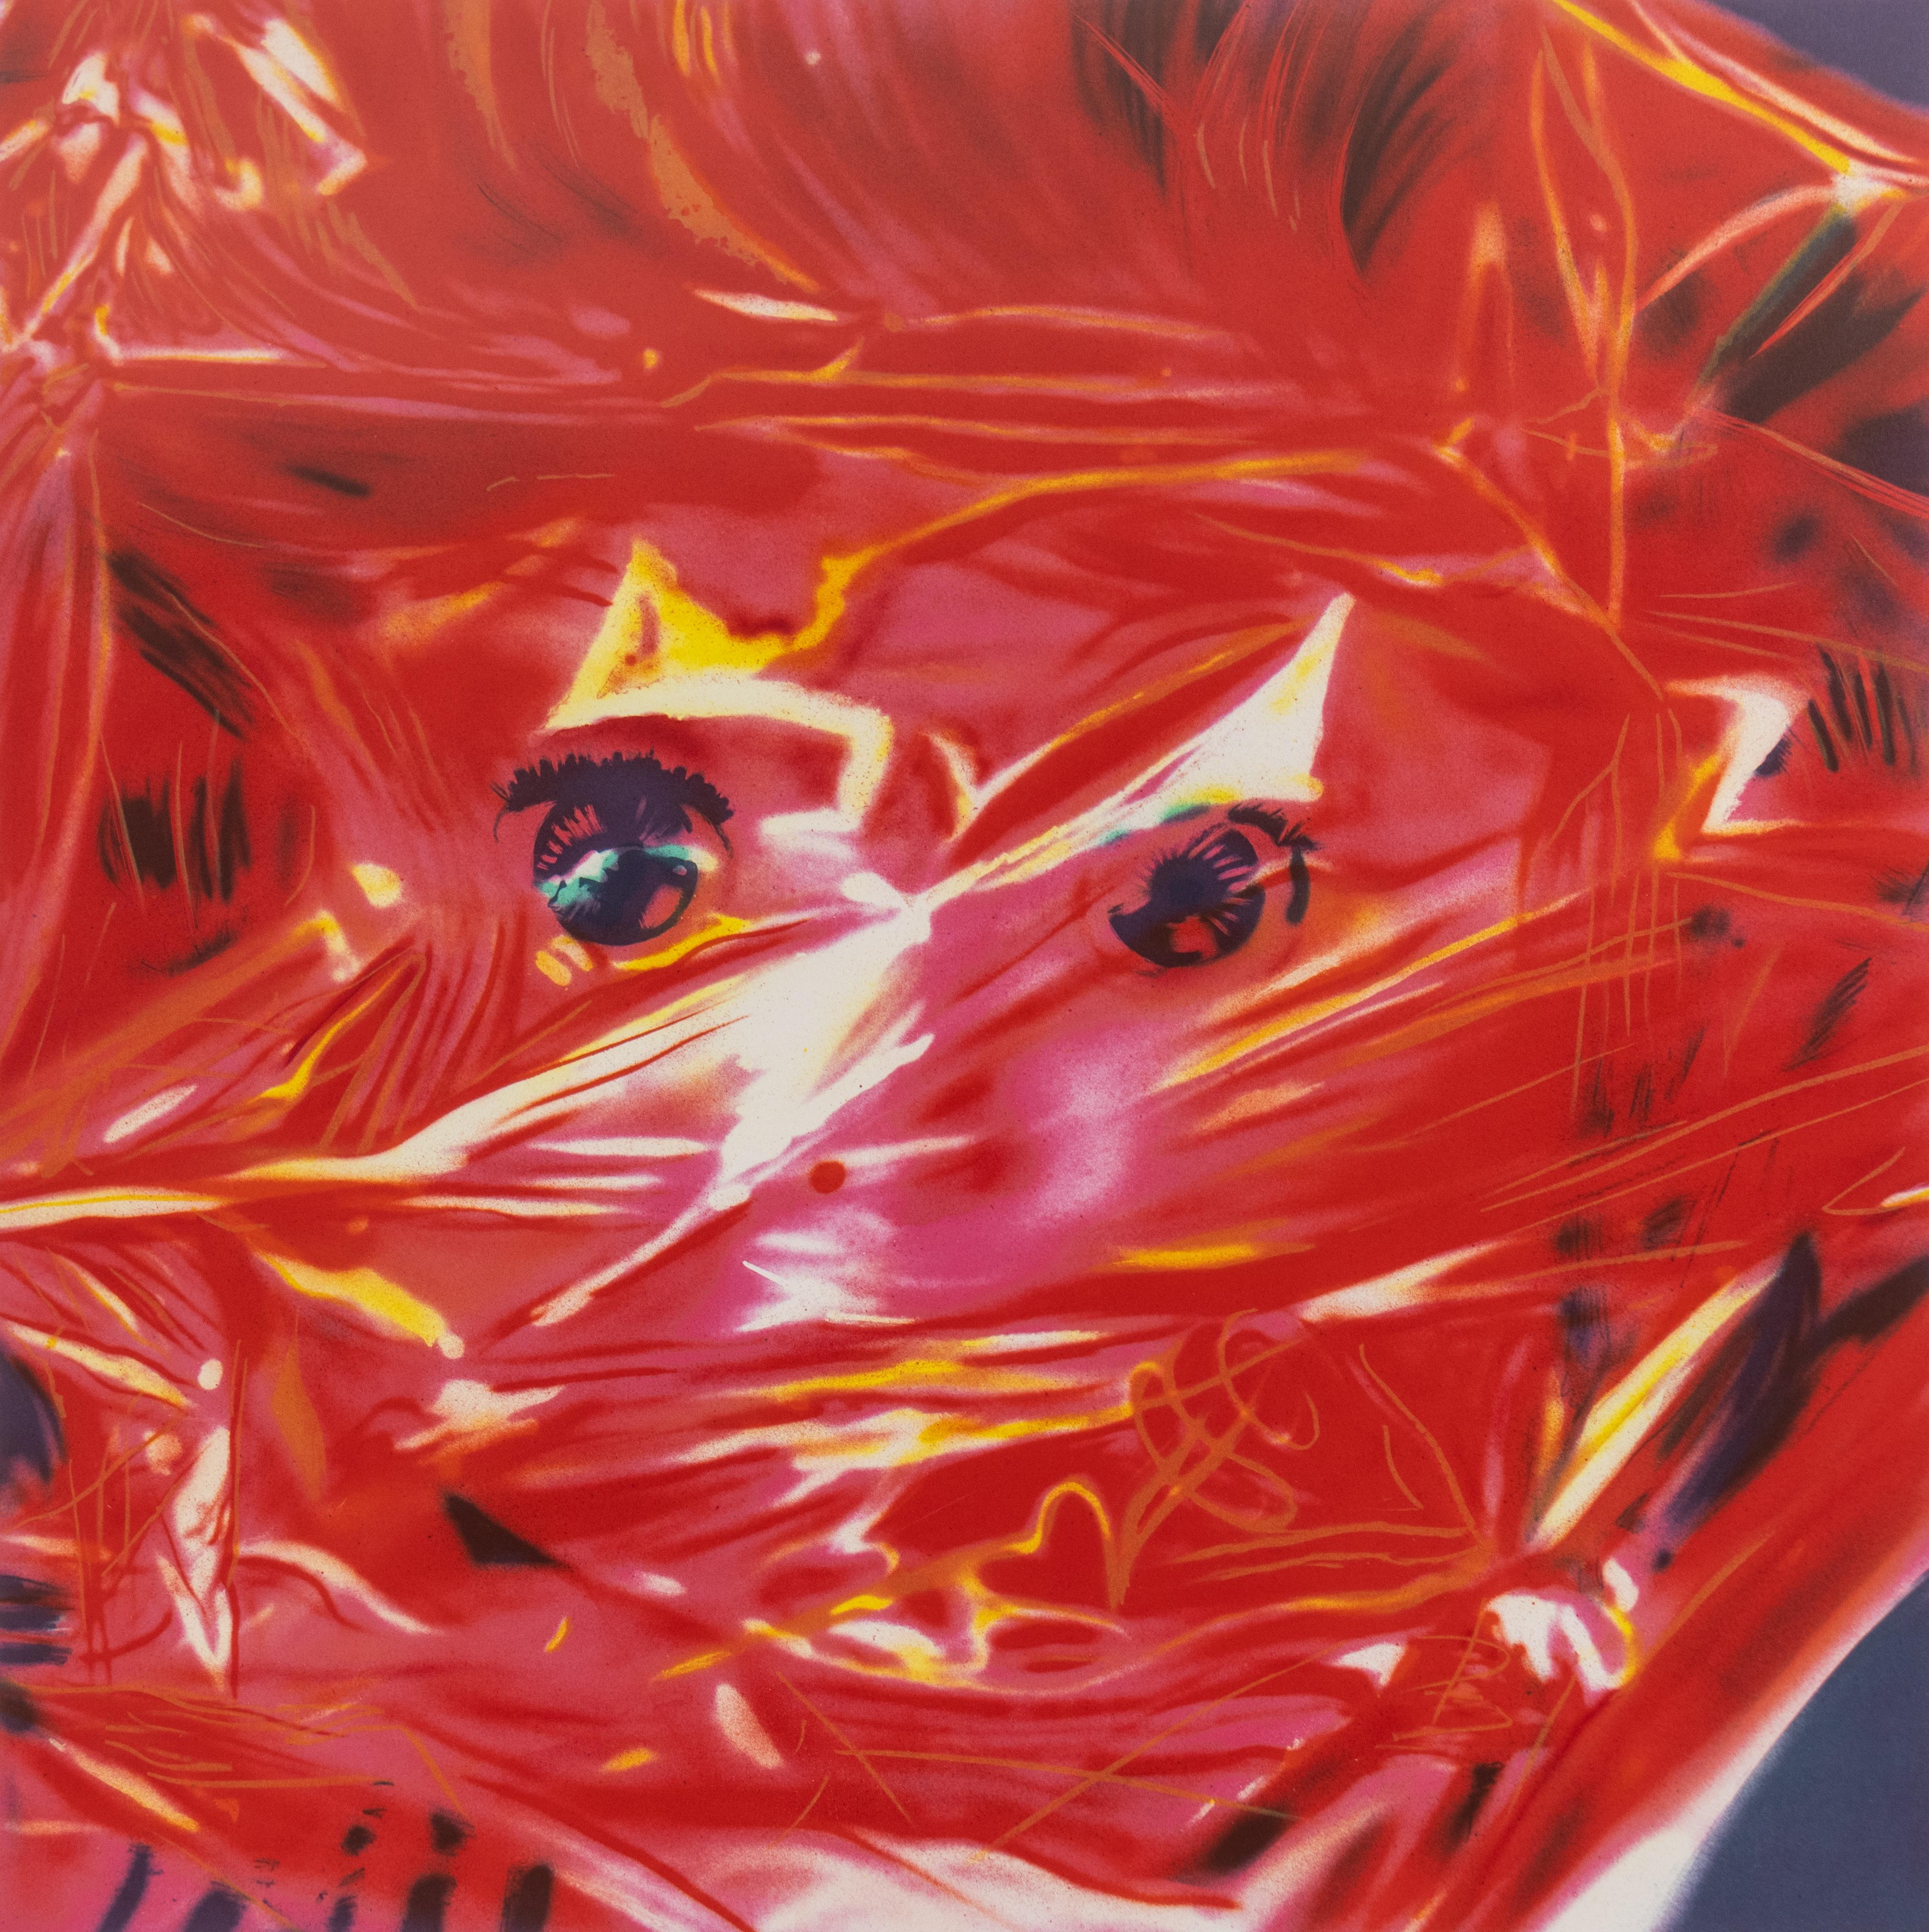 Gift Wrapped Doll - Photograph by James Rosenquist